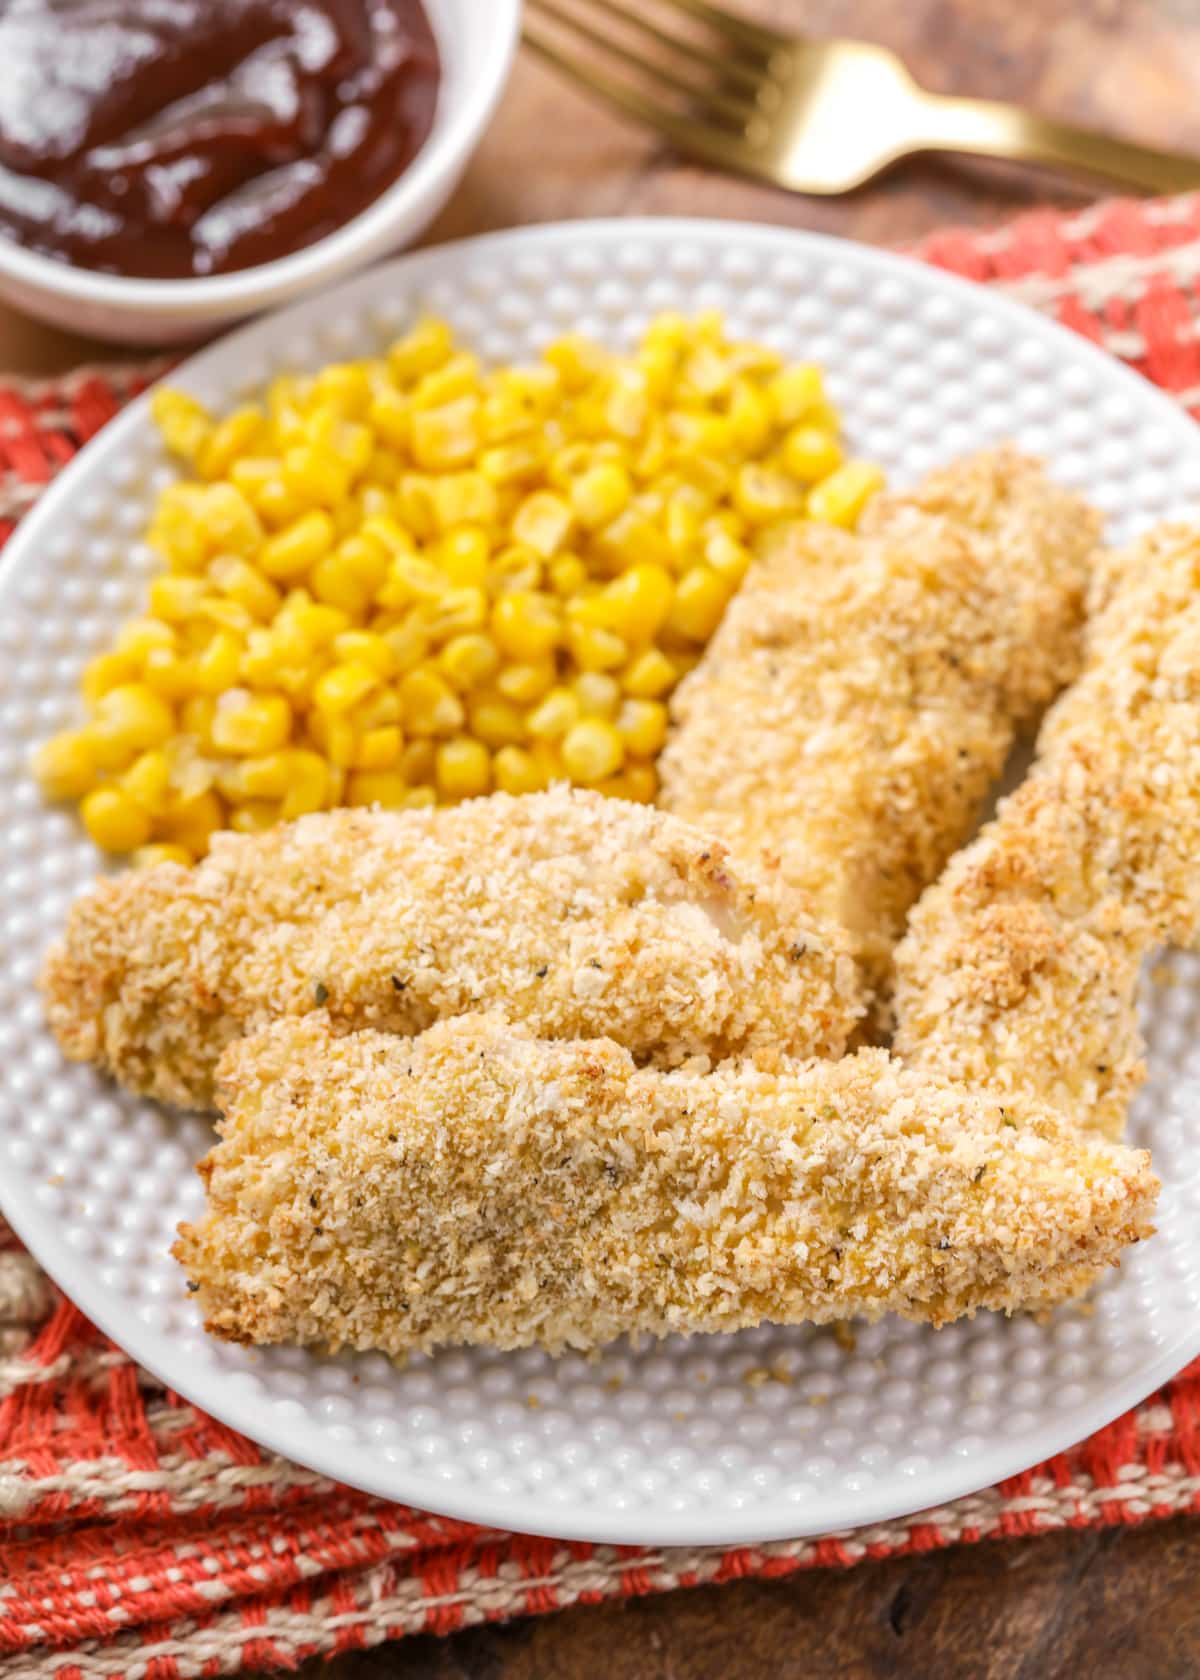 Baked Chicken Tenders Recipe on plate with corn and bbq sauce